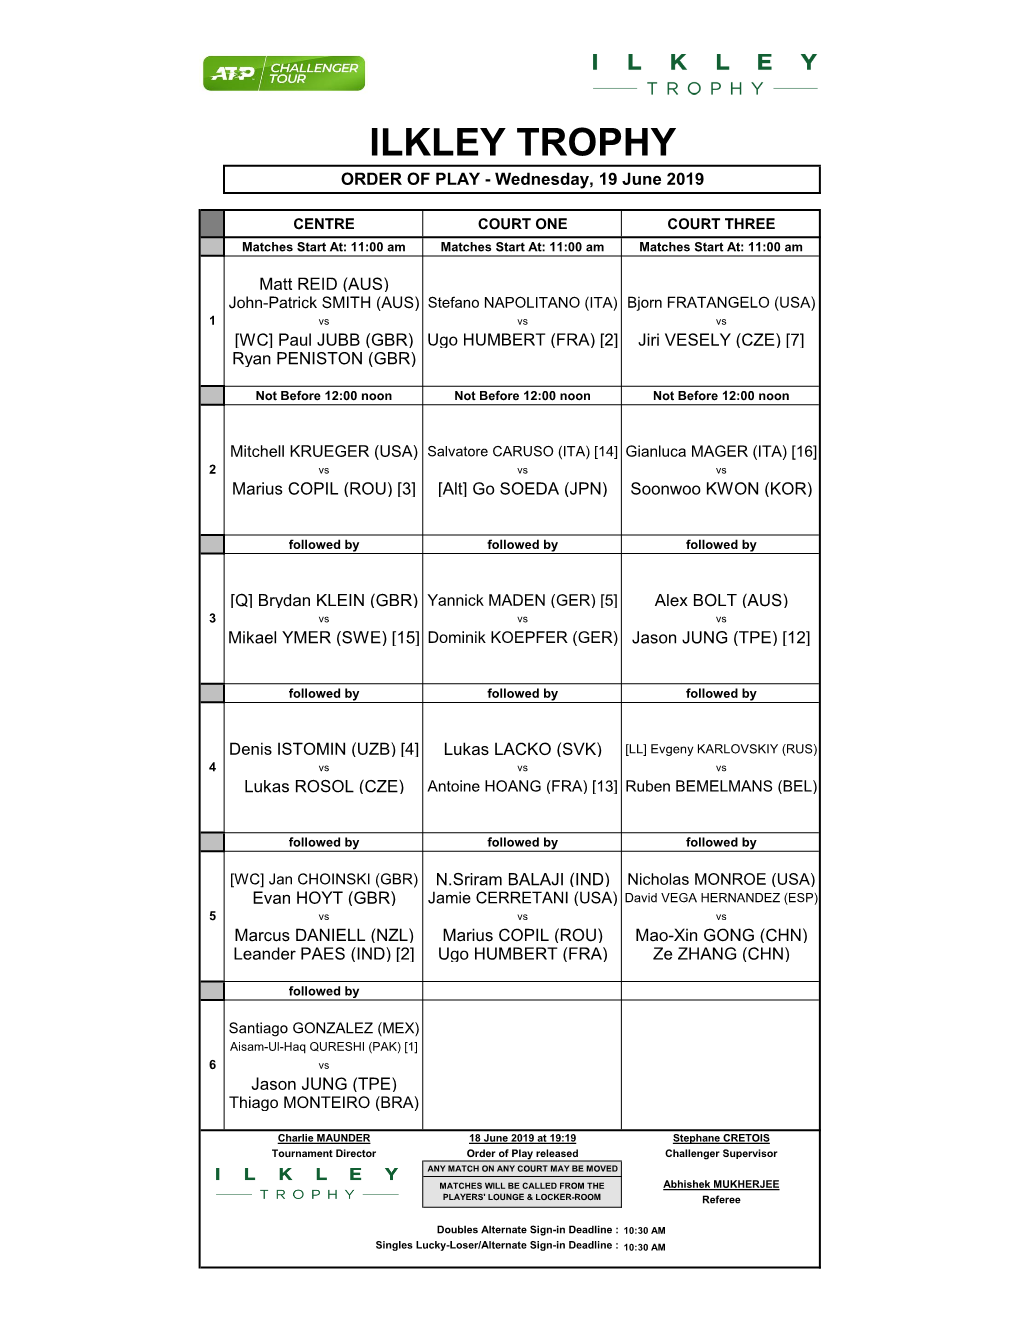 ILKLEY TROPHY ORDER of PLAY - Wednesday, 19 June 2019